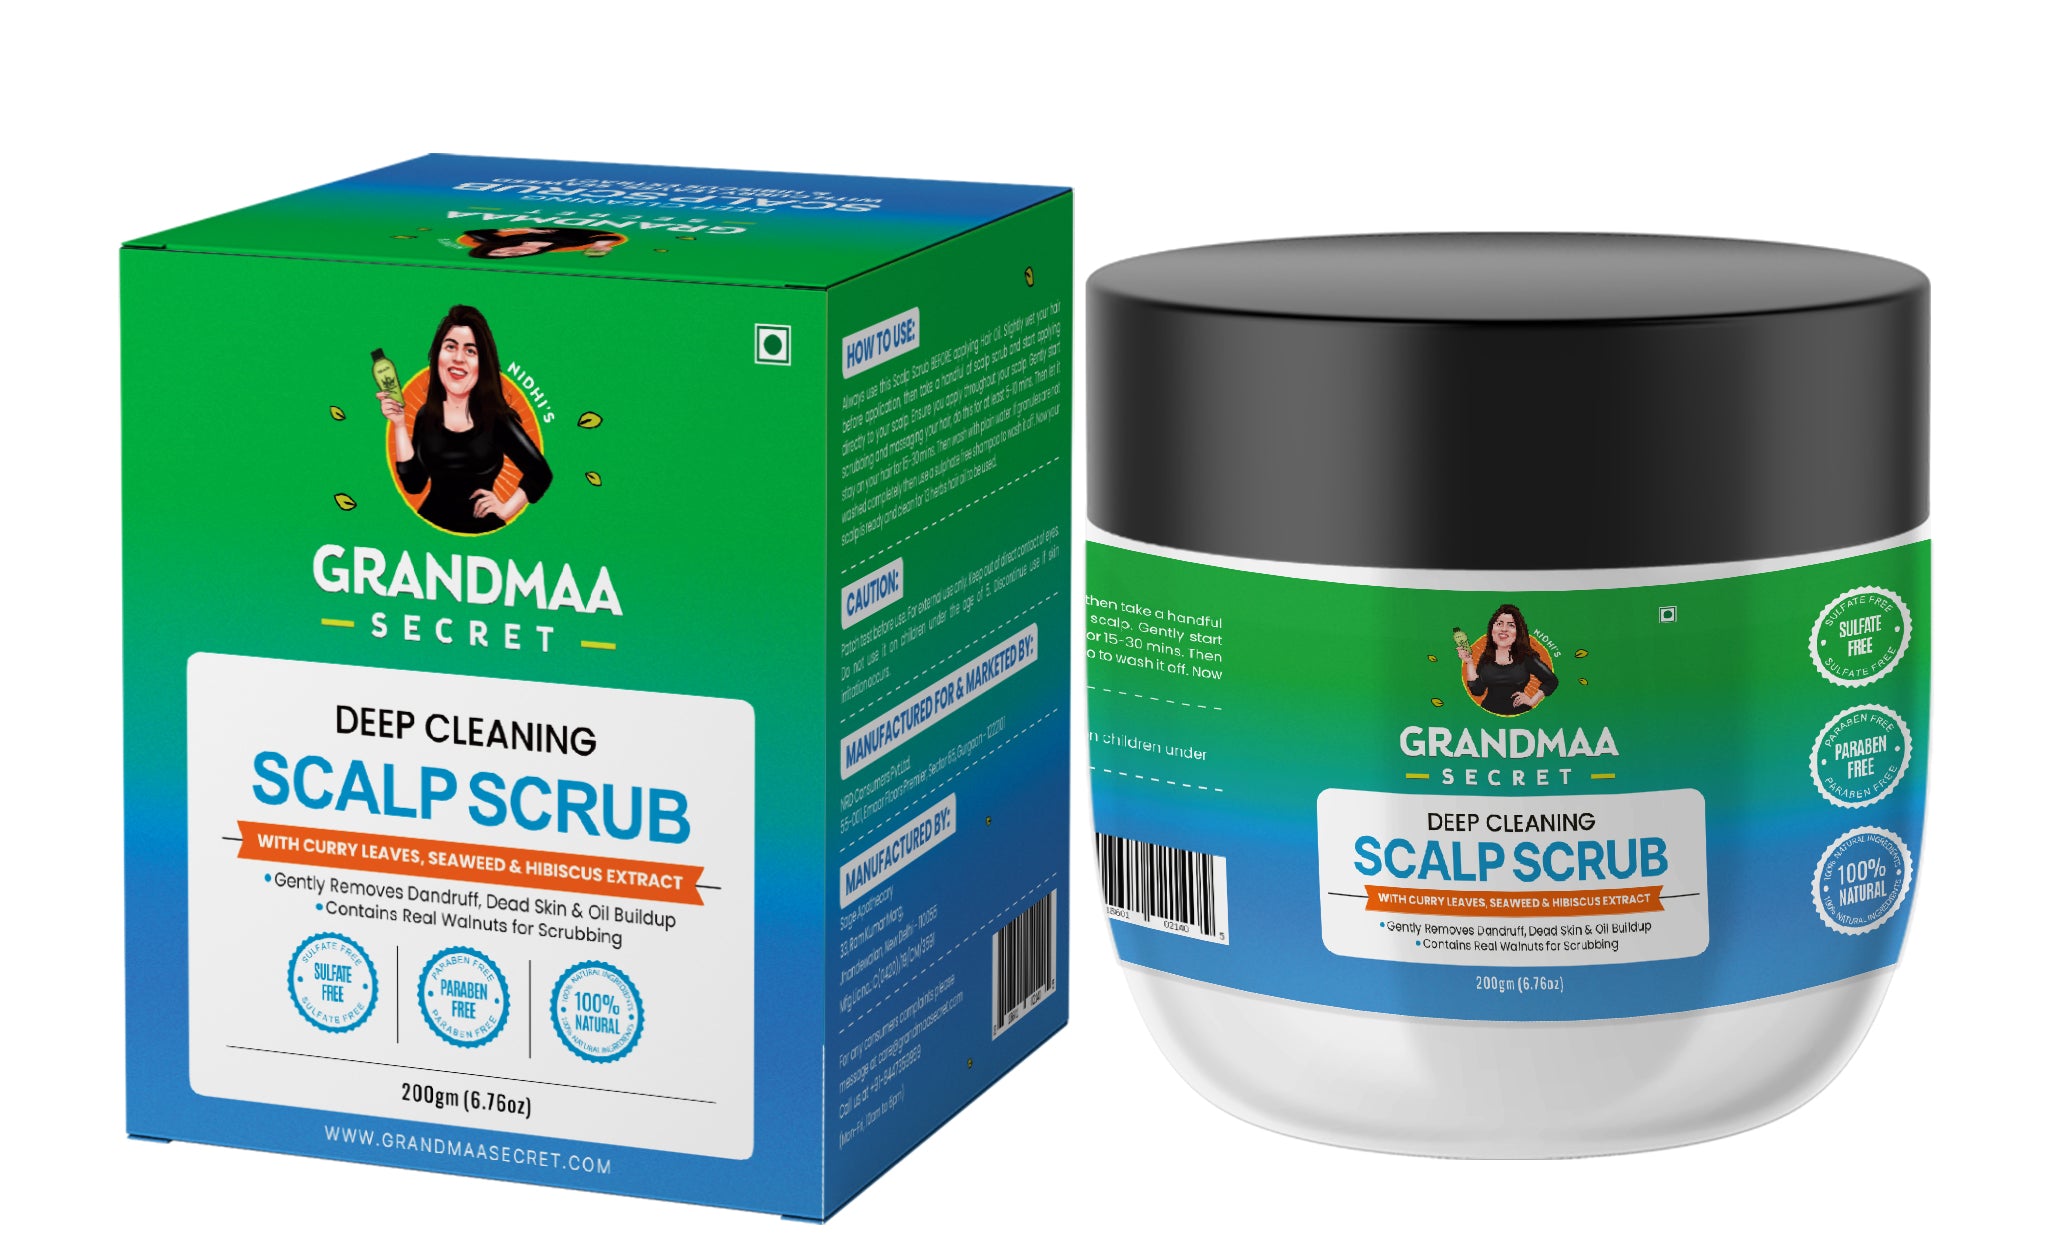 Scalp Scrub with Curry Leaves & Seaweed - Removes Dandruff, Dead Skin & Oil Buildup - 200g